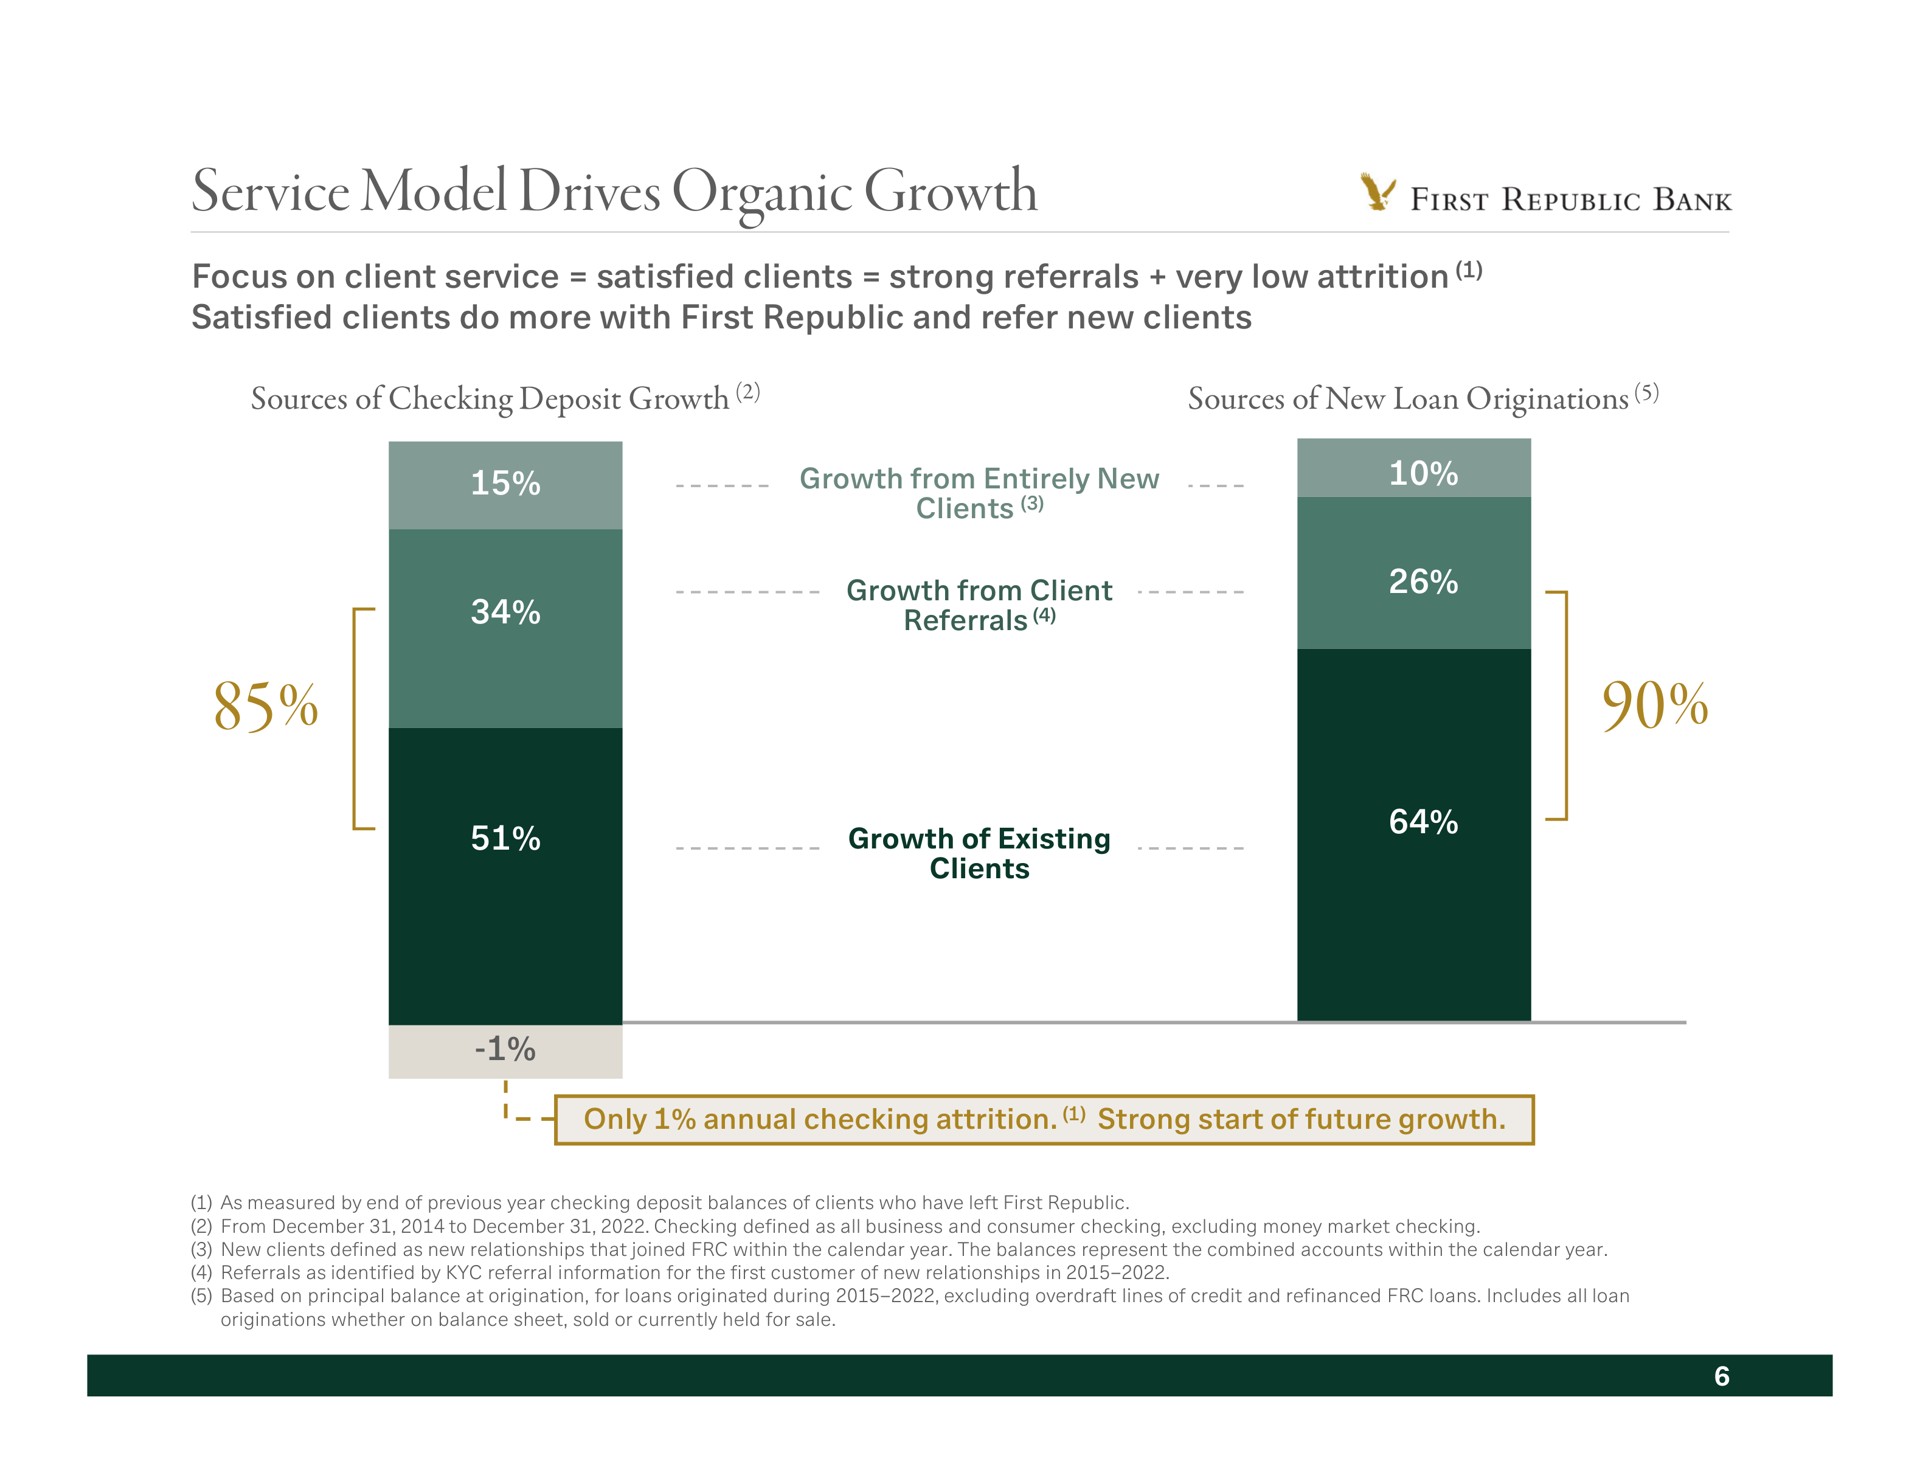 service model drives organic growth focus on client satisfied clients strong referrals very low attrition | First Republic Bank